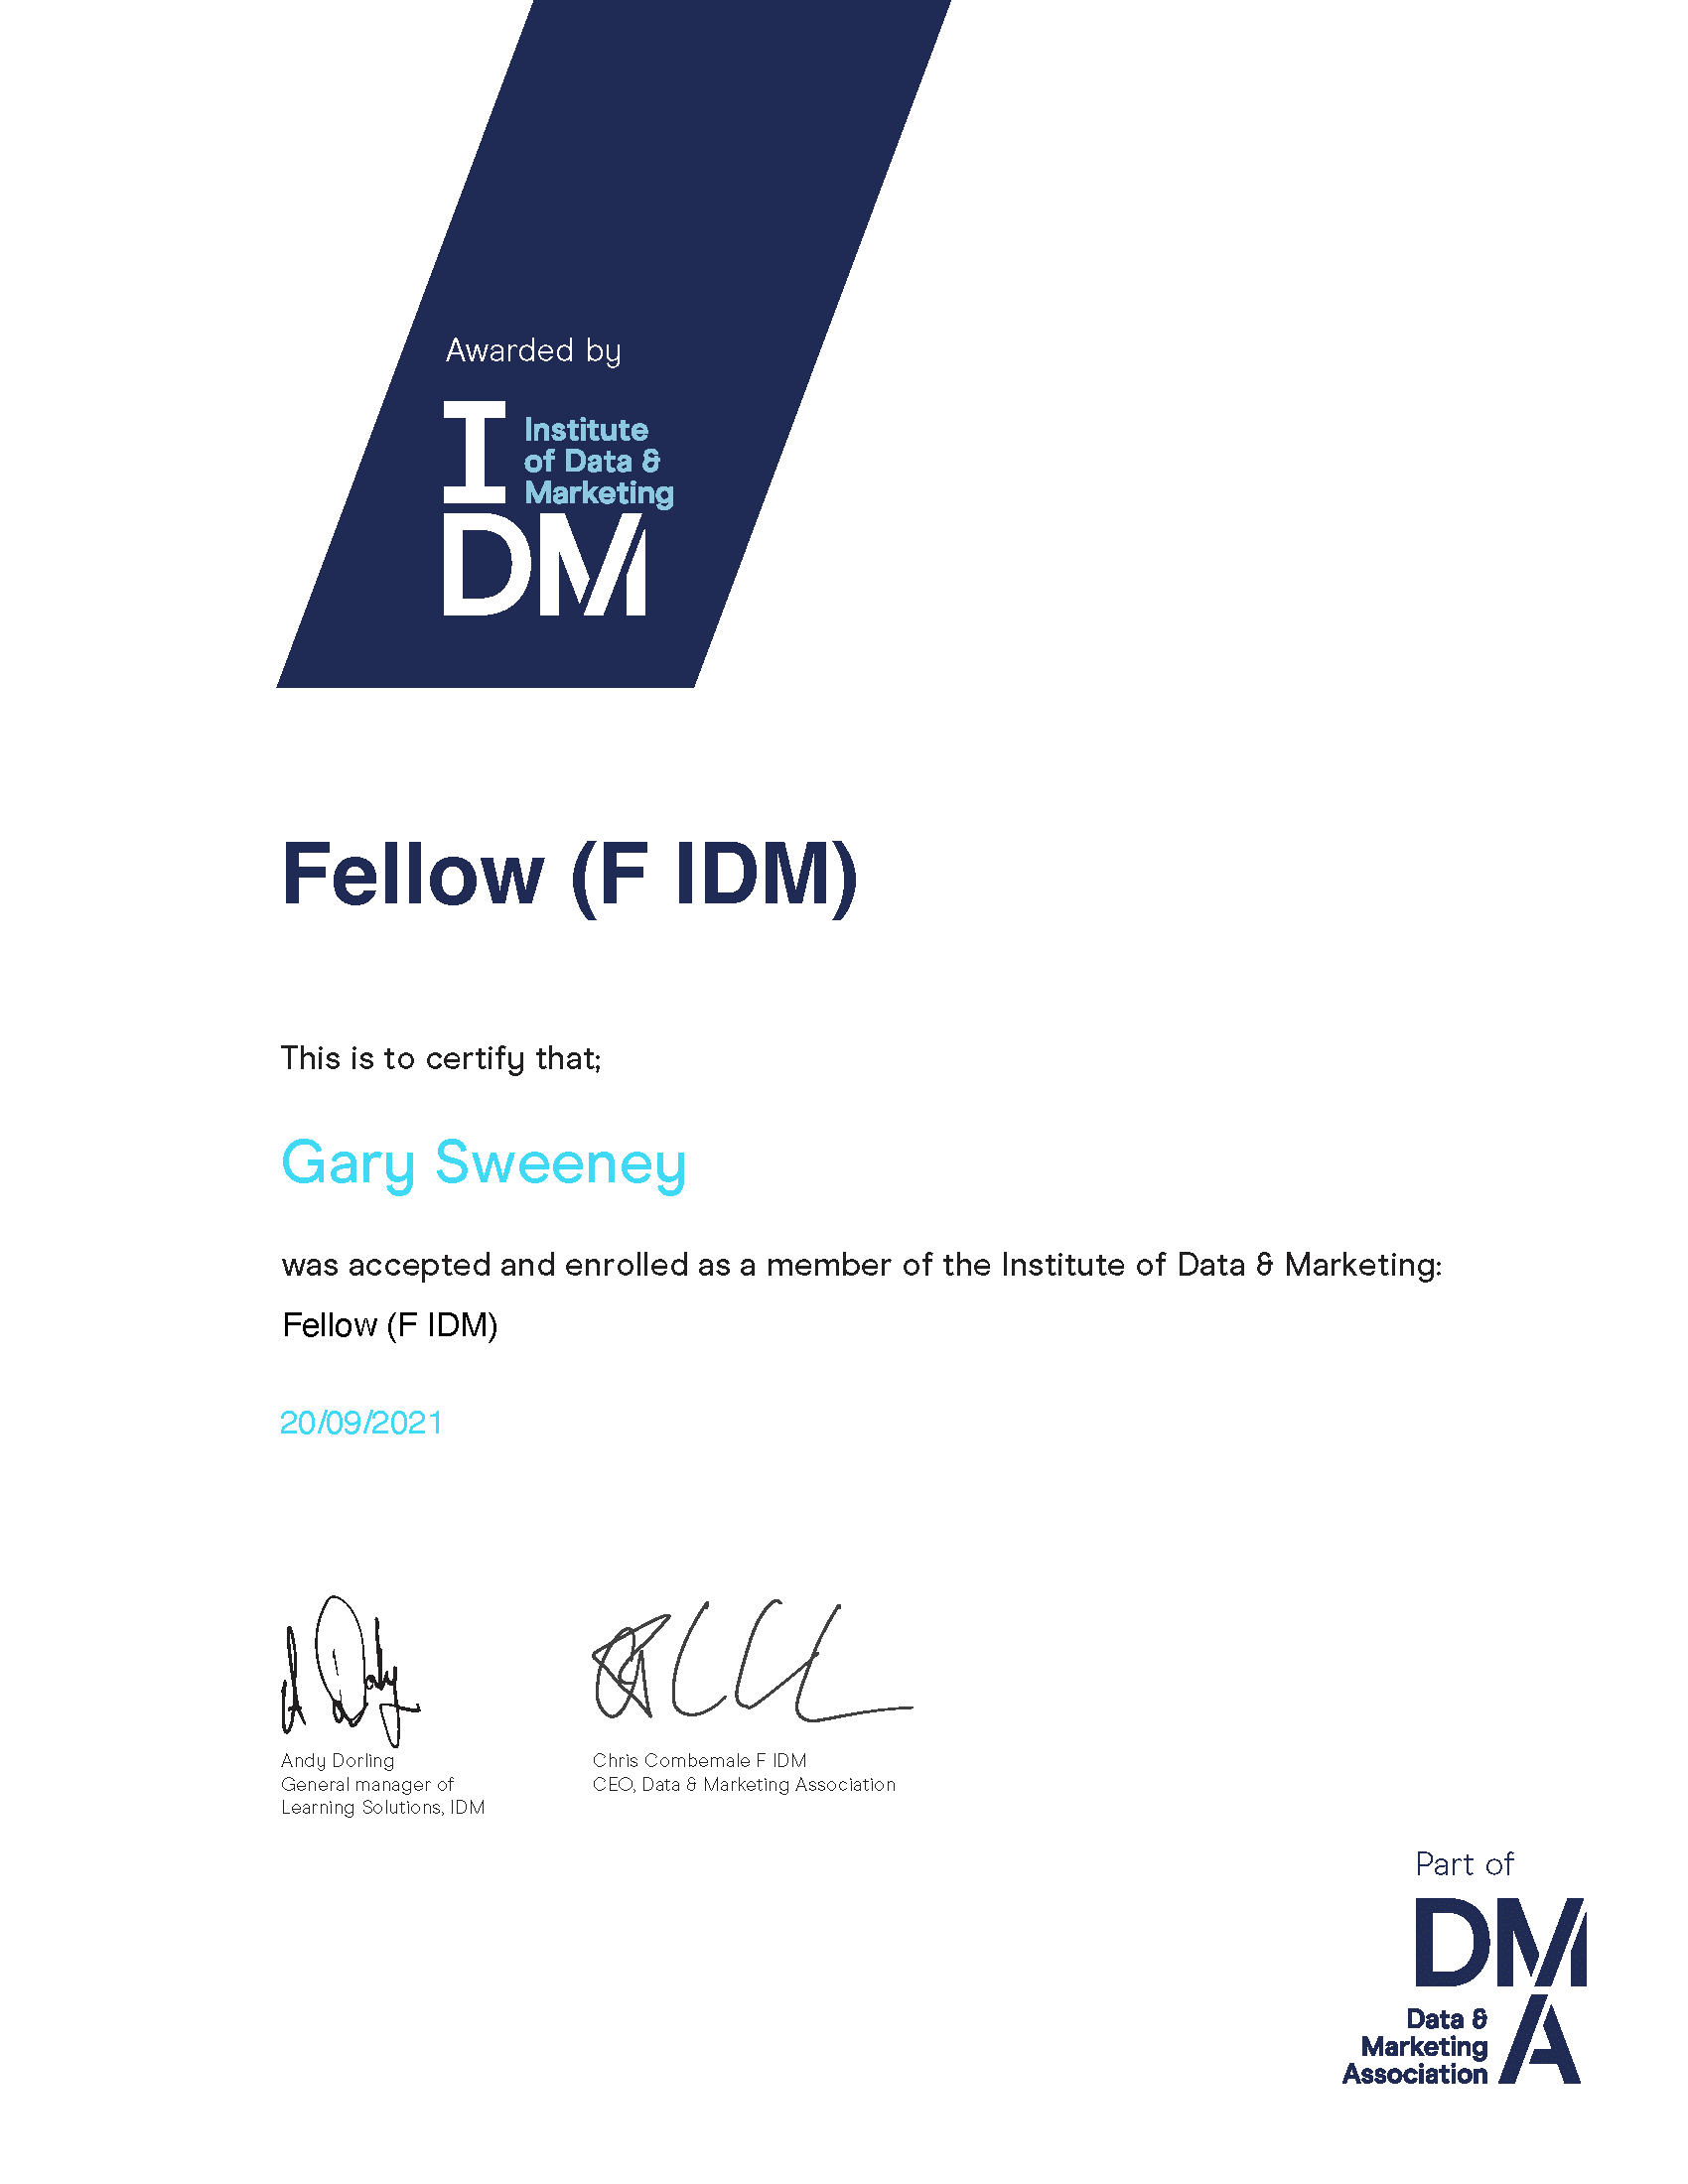 Awarded by Institute of Data & Marketing. Part of Data & Marketing Association. This is to verify that Gary Sweeney was accepted and enrolled as a member of the Insitute of Data & Marketing: Fellow (F IDM)